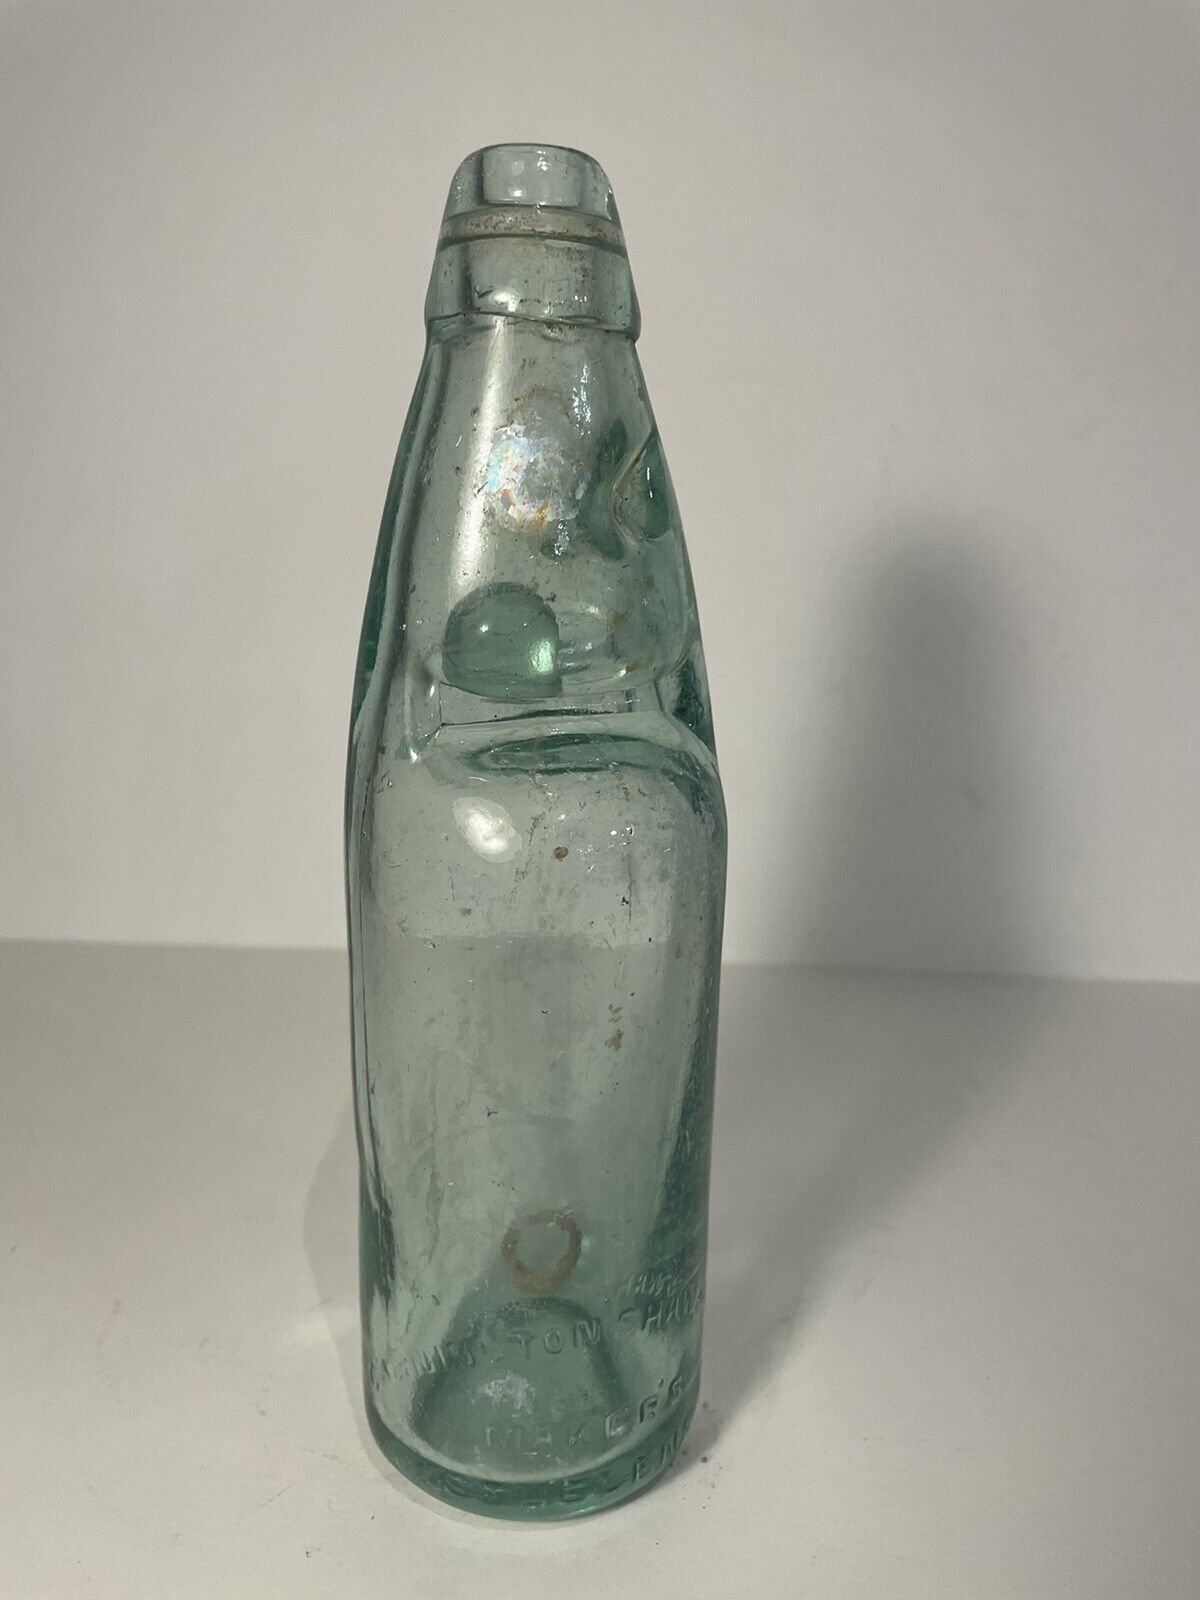 glass bottle - cannington shaw & co makers sihelens